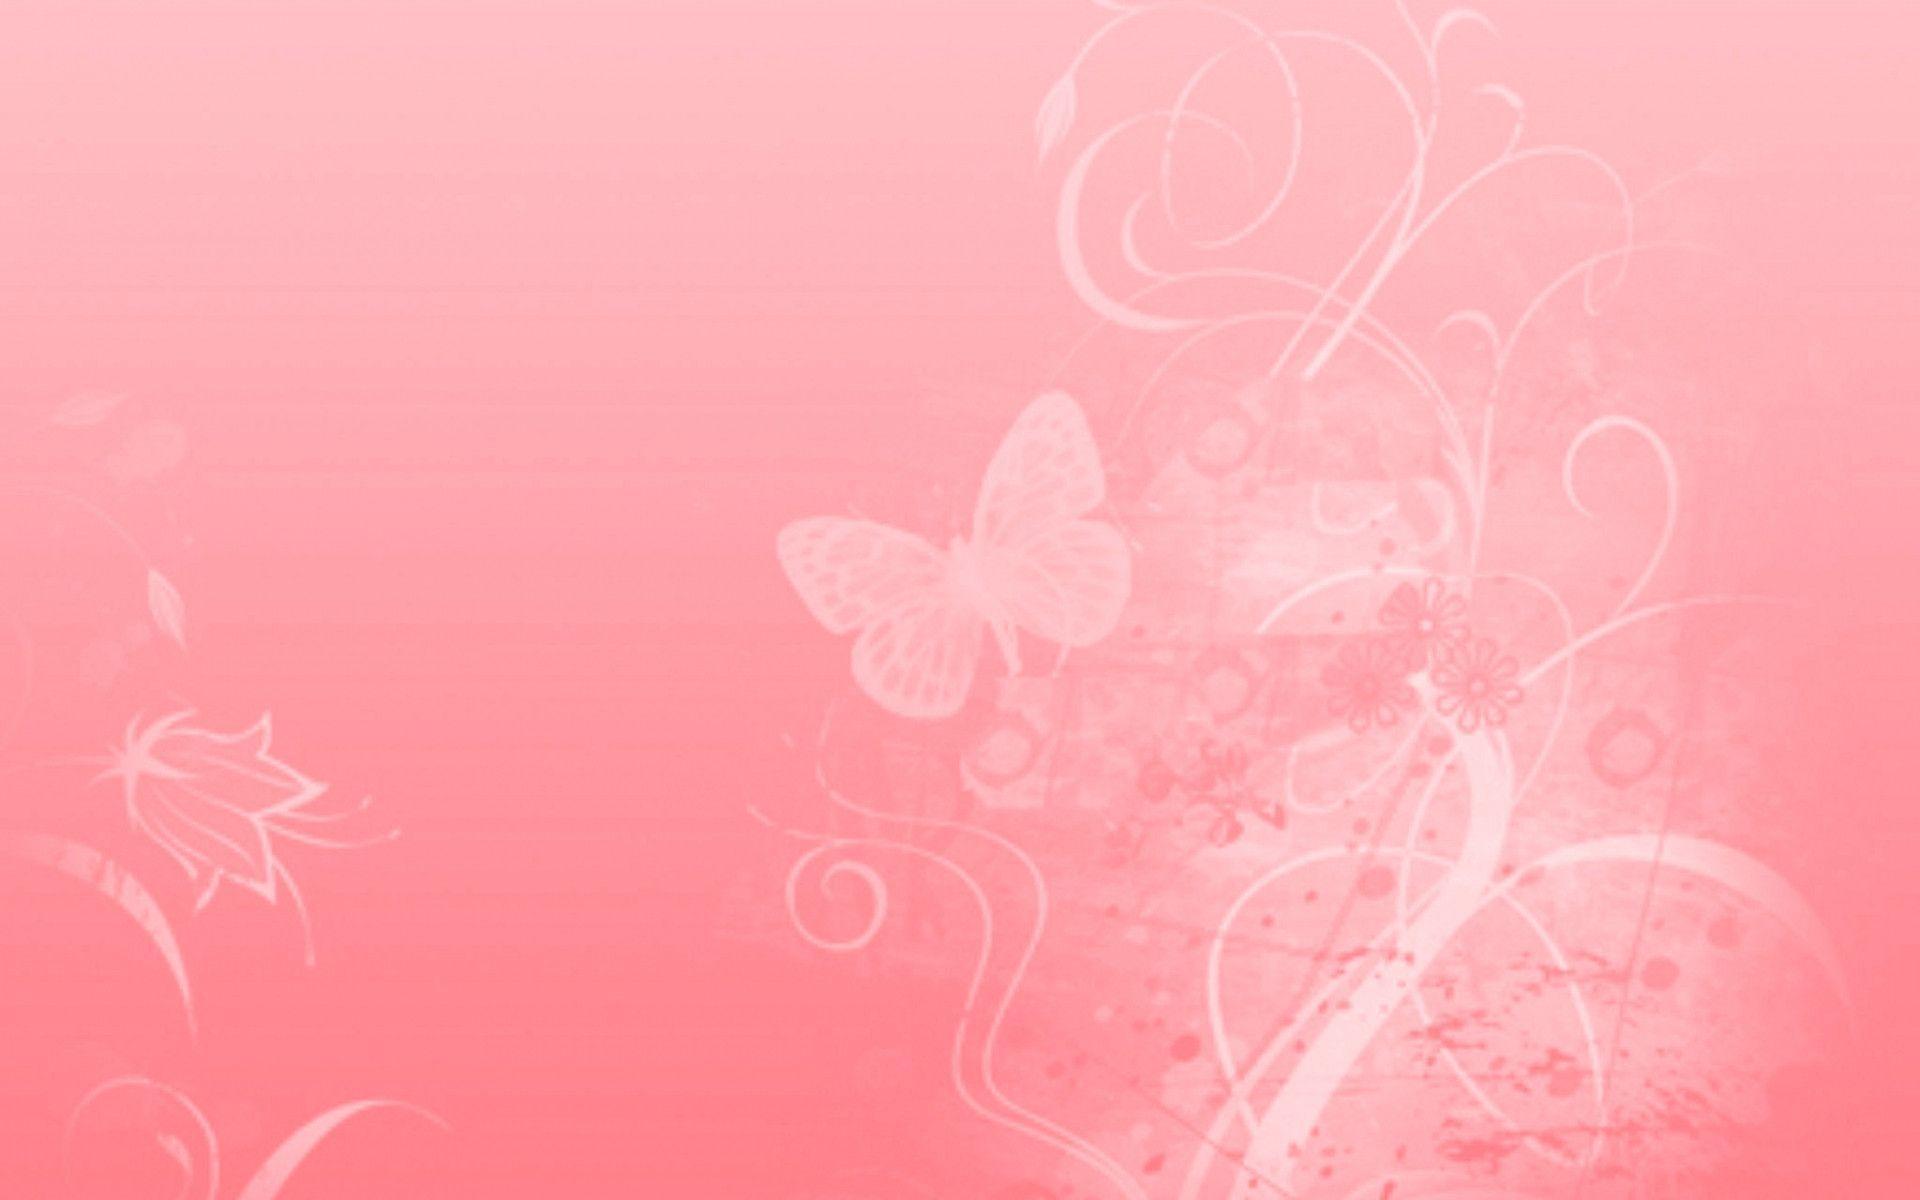 Floral Pink Cat 1024x768 pixel PPT Background for Powerpoint